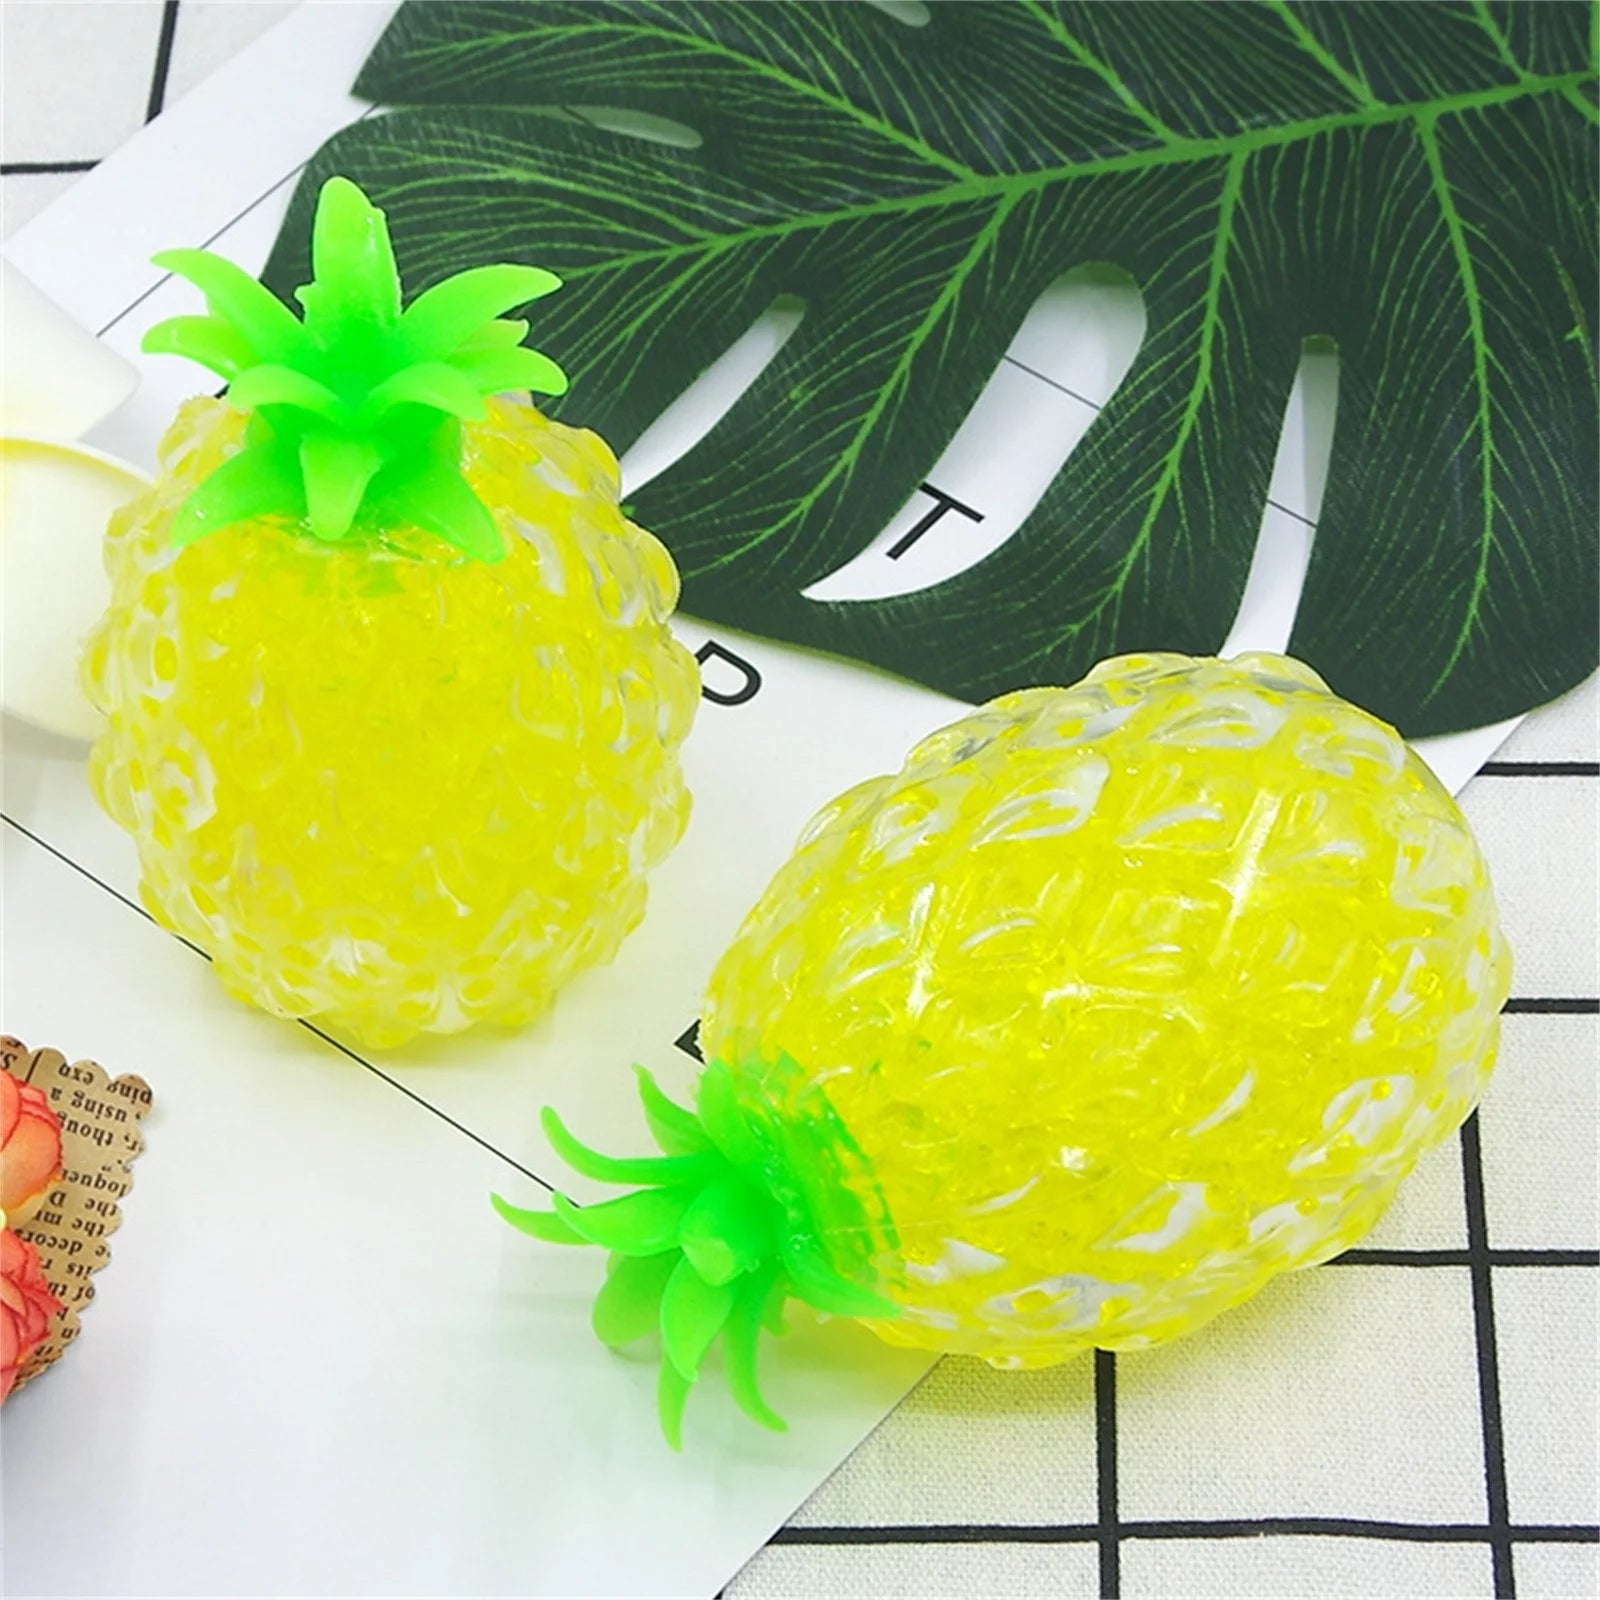 Pineapple Stress Ball, Squishy Toy Stress Ball for Adults with Anxiety Autism, Pineapple Fruit Squeeze Balls Sensory Toy for Pressure Release Party Gift